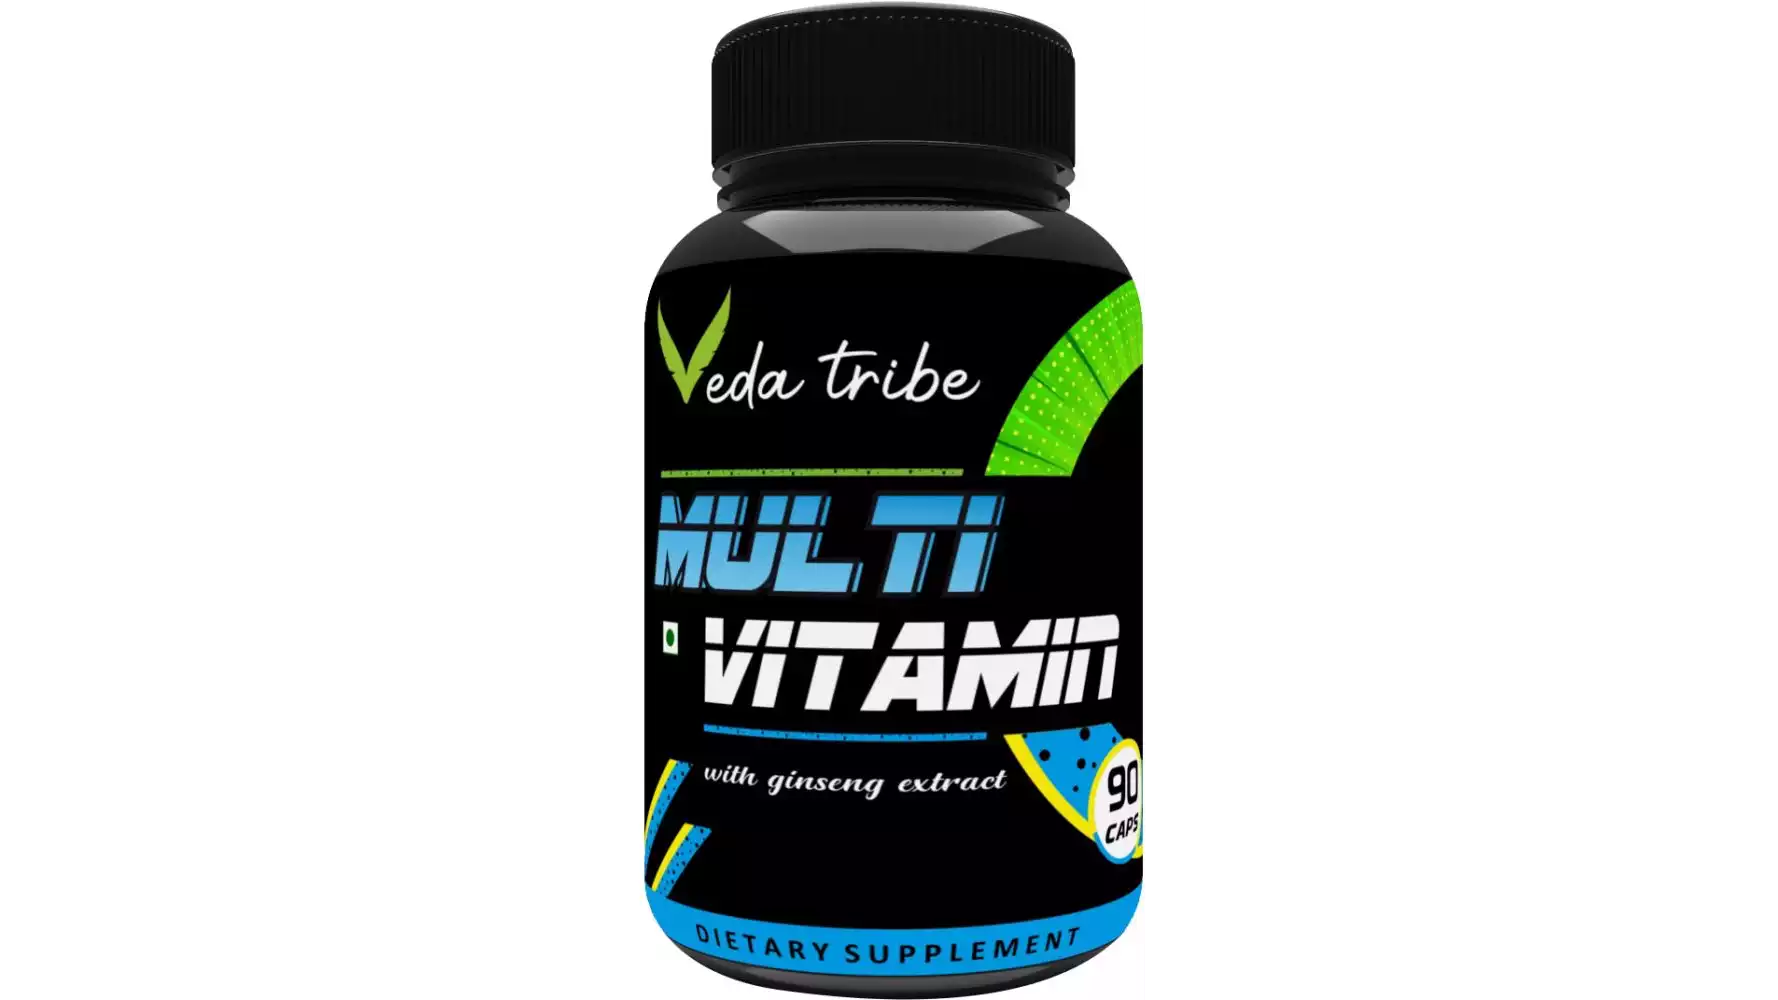 Veda Tribe Multivitamin With Ginseng Extract (90caps)